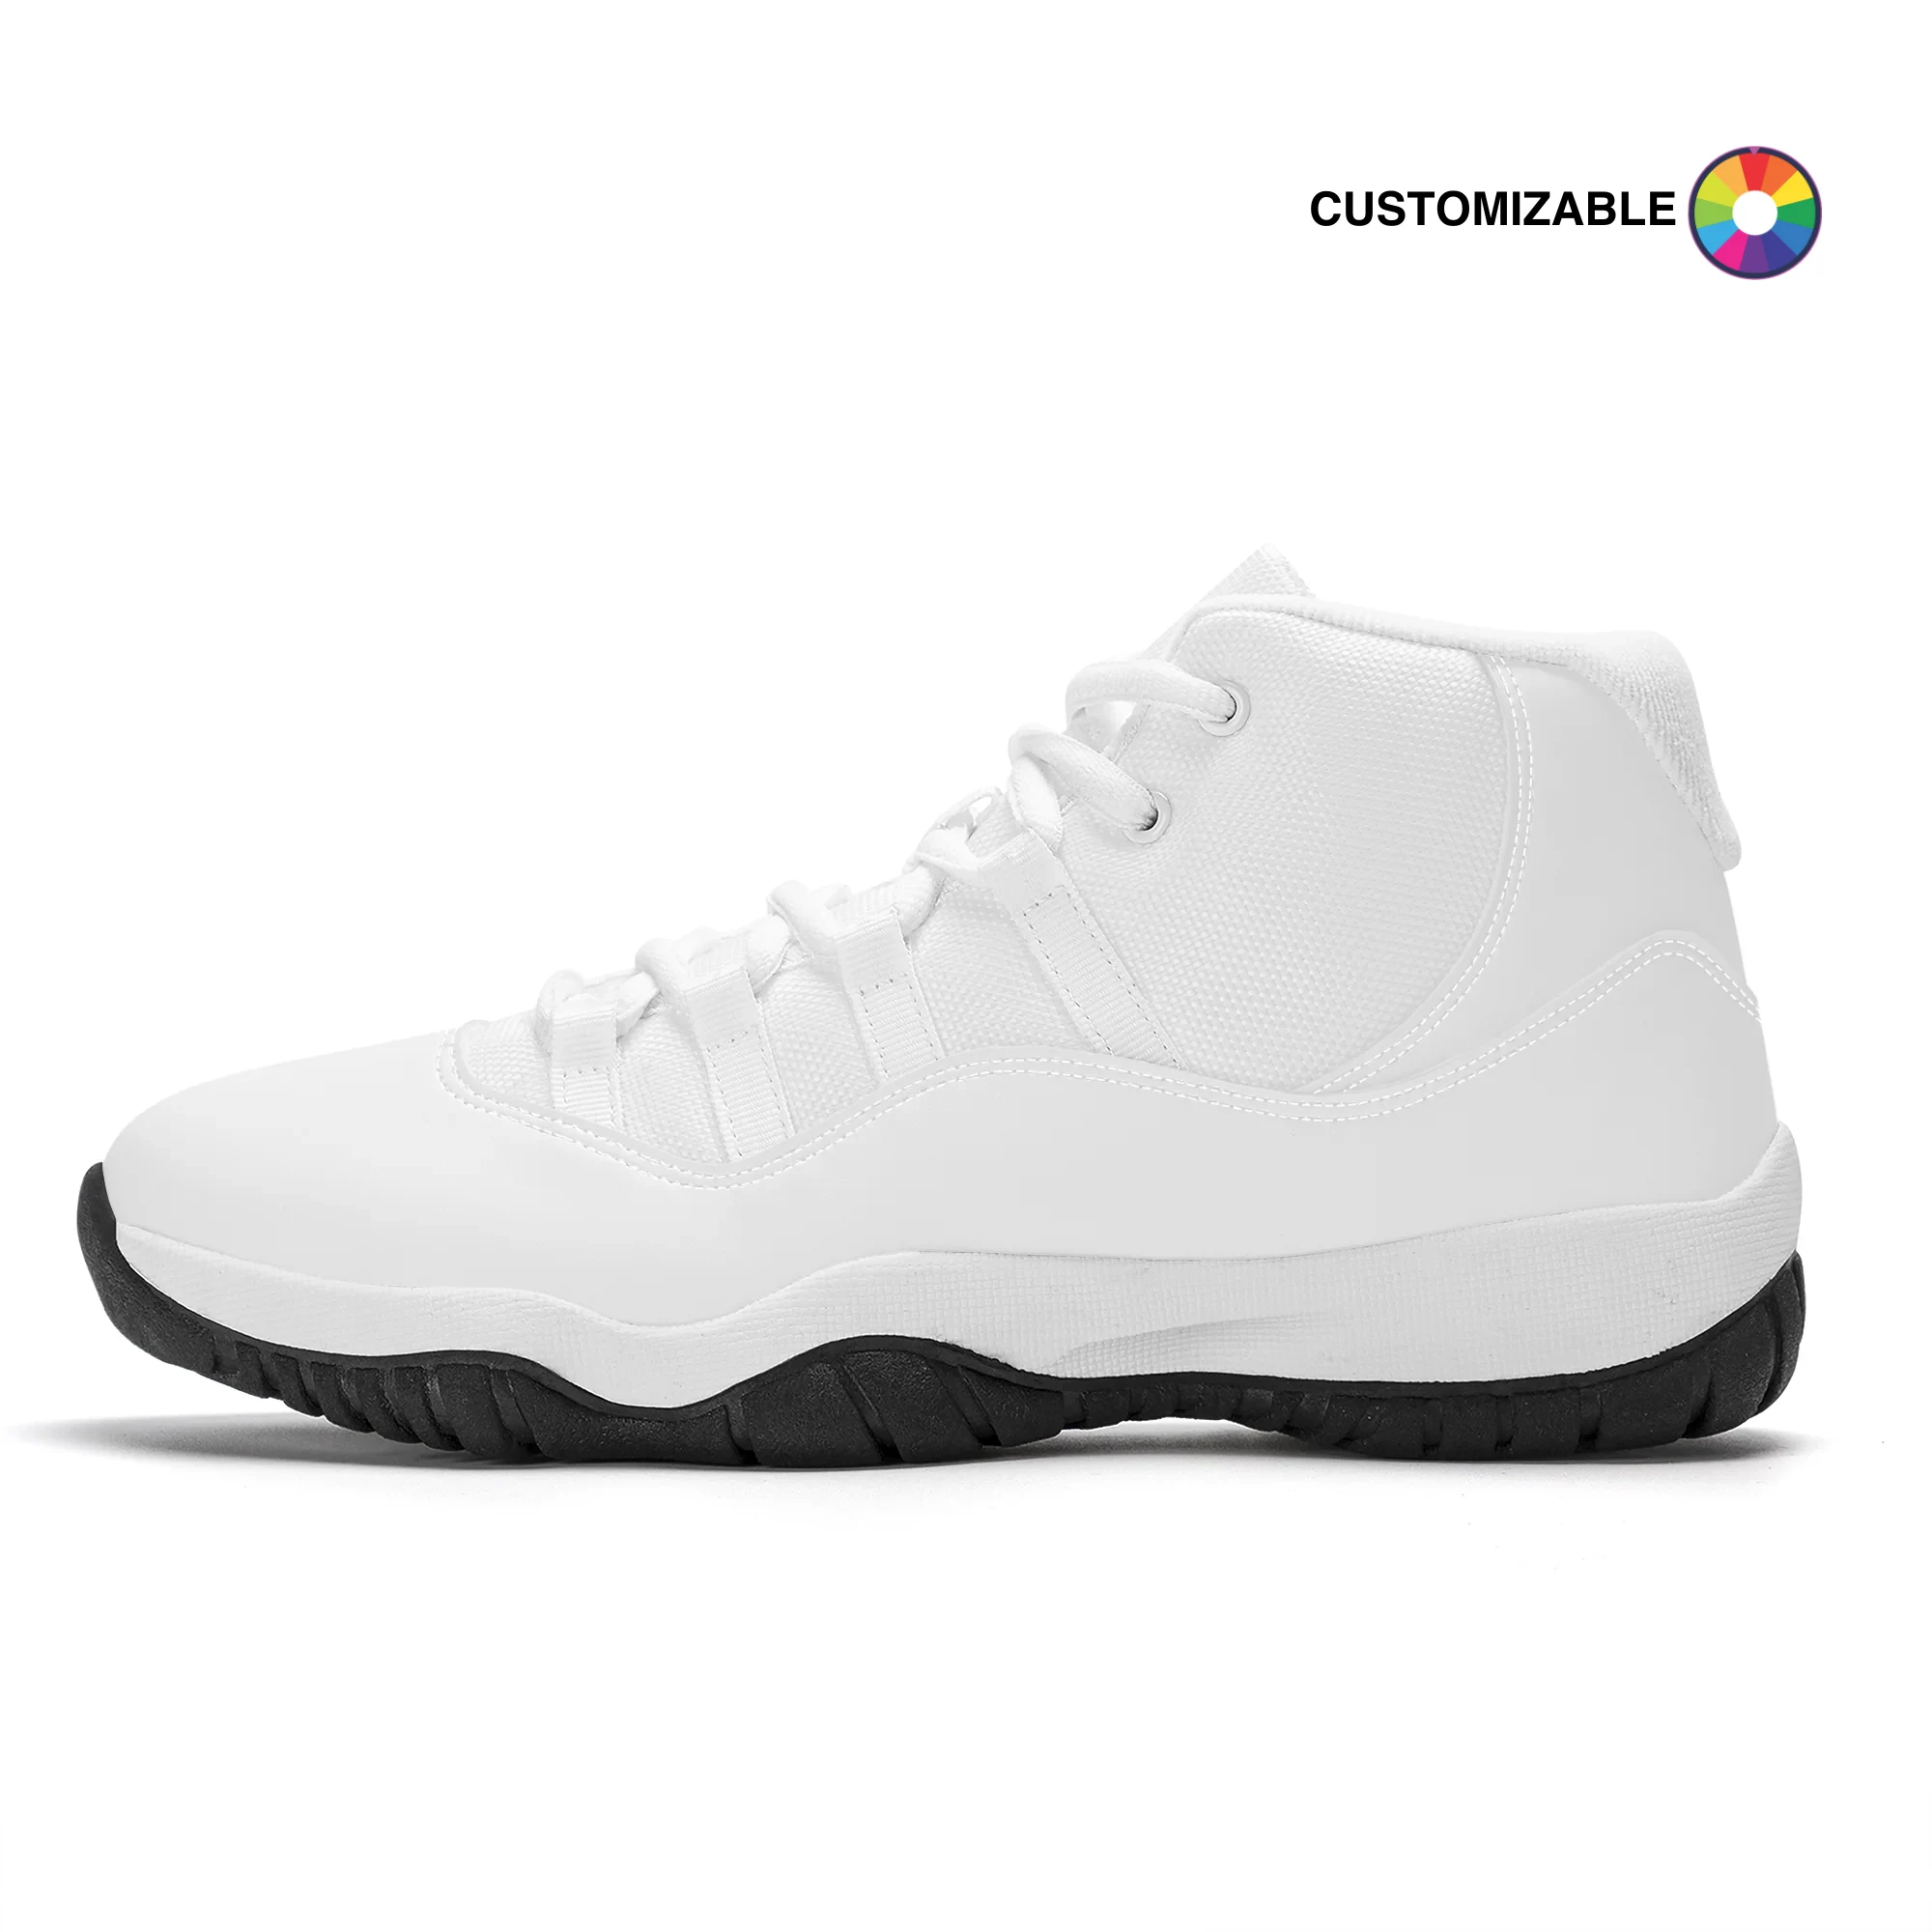 Customizable High Top Air Retro Sneakers (White Lace)